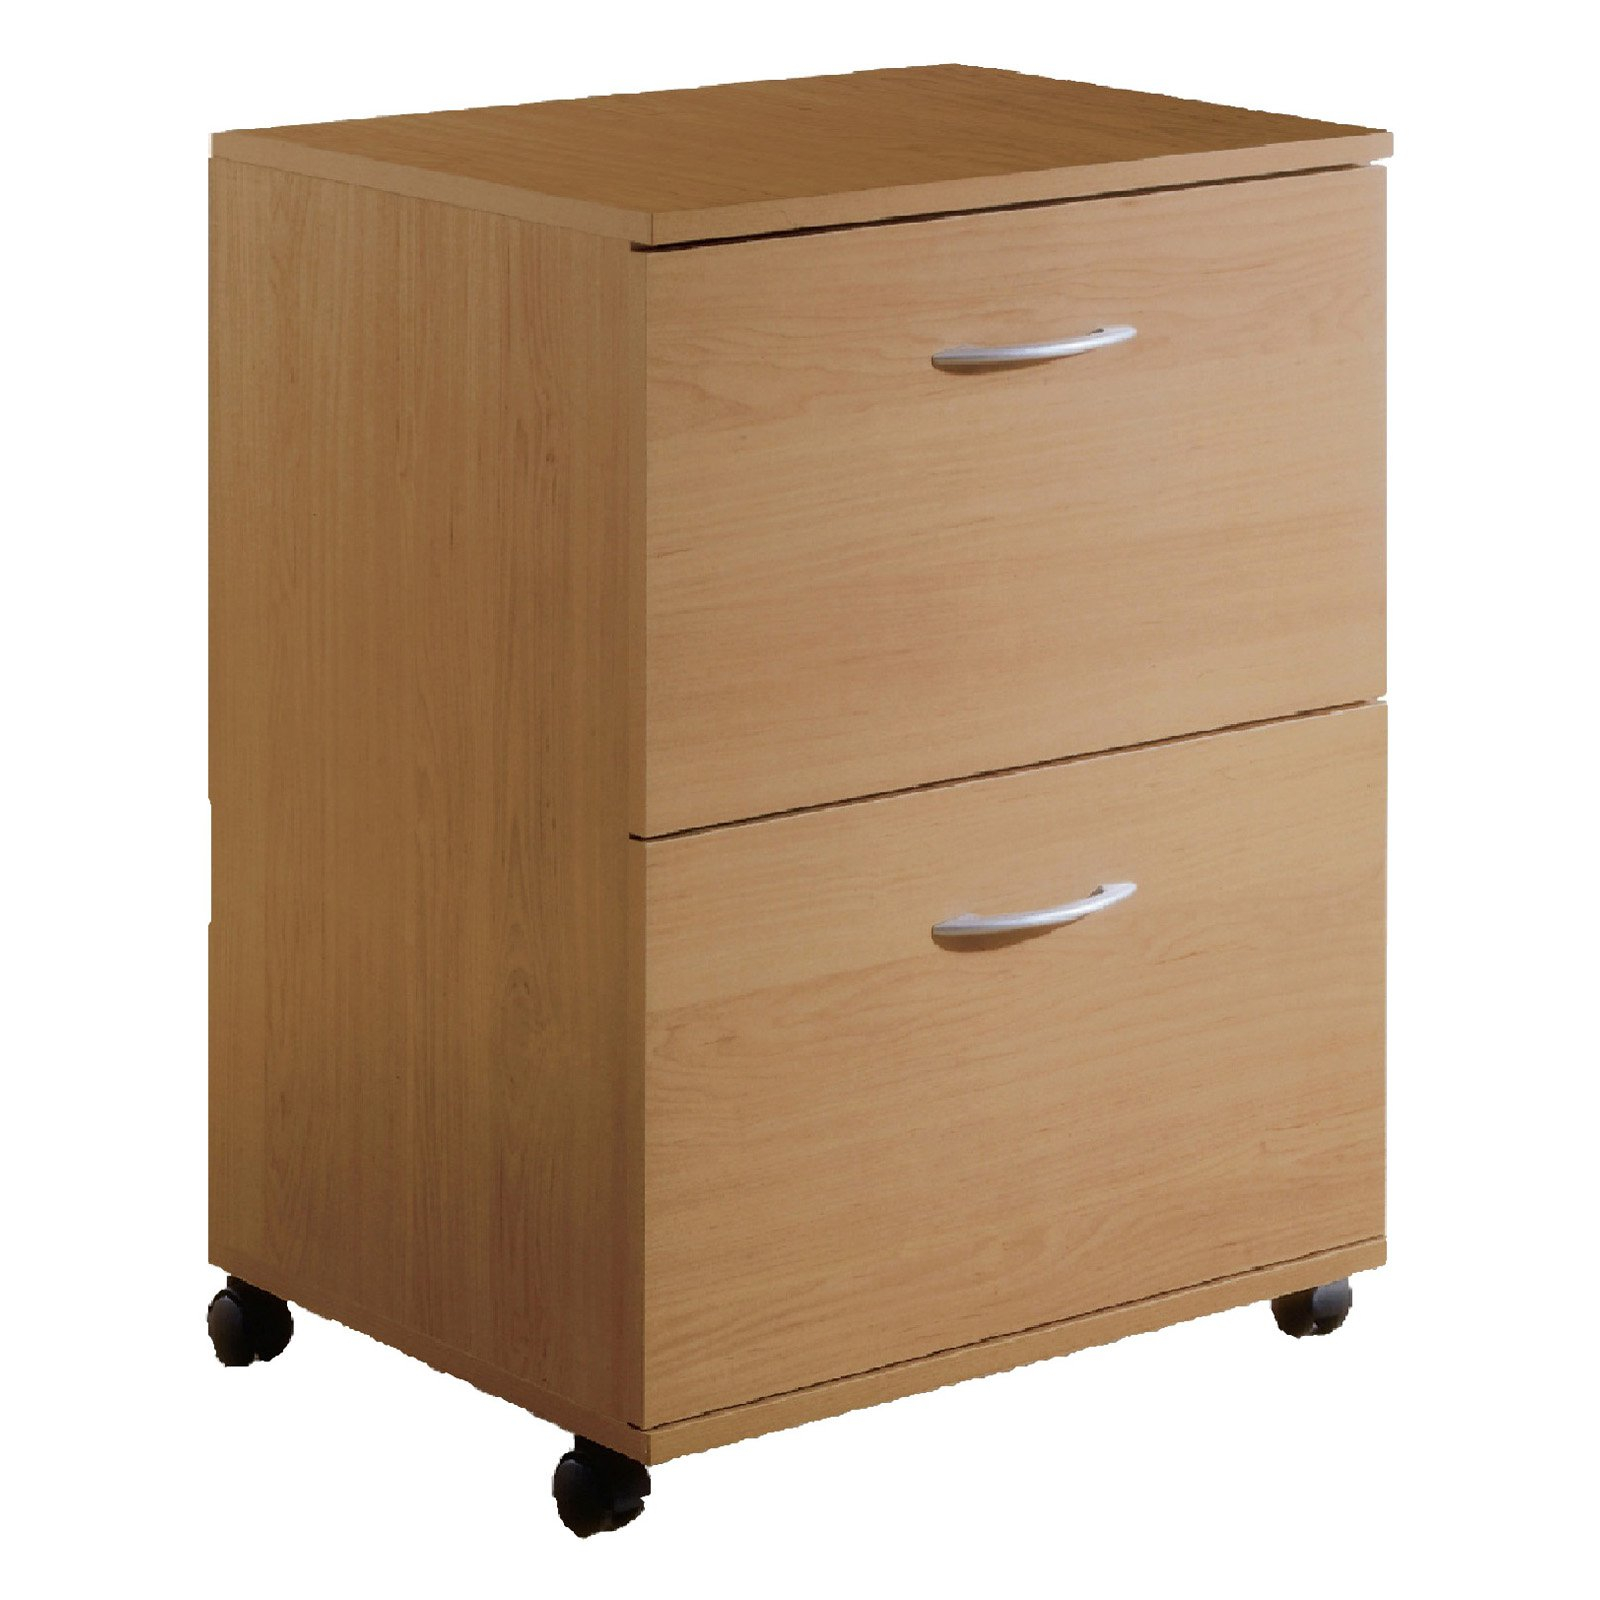 2 Drawers Vertical Wood Composite Filing Cabinet Walmart pertaining to size 1600 X 1600